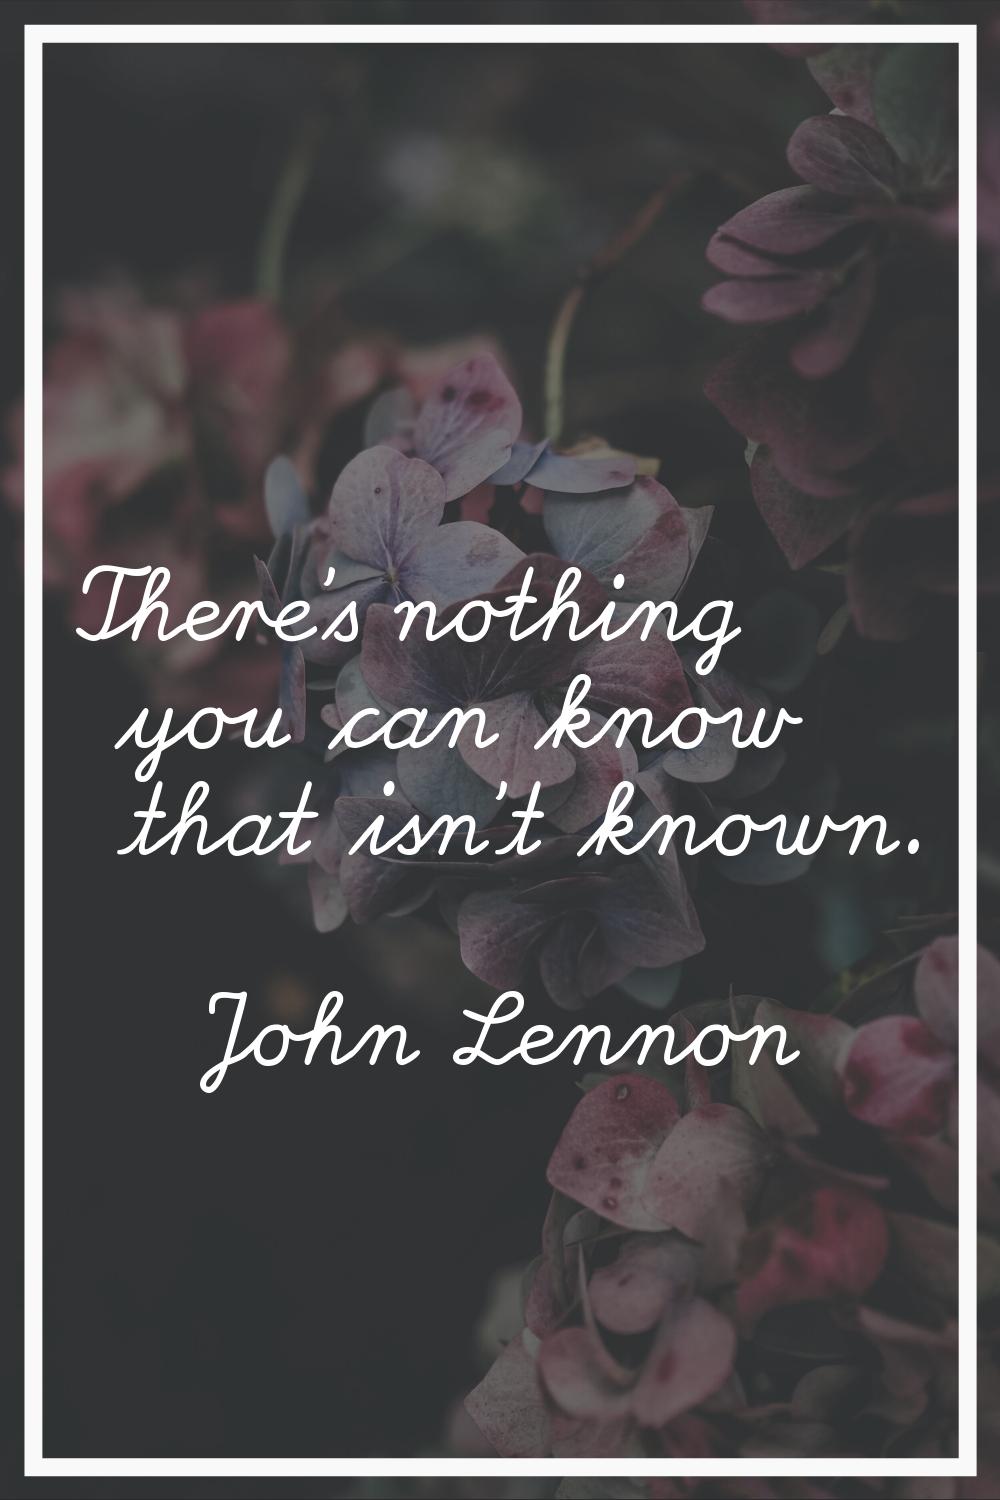 There's nothing you can know that isn't known.